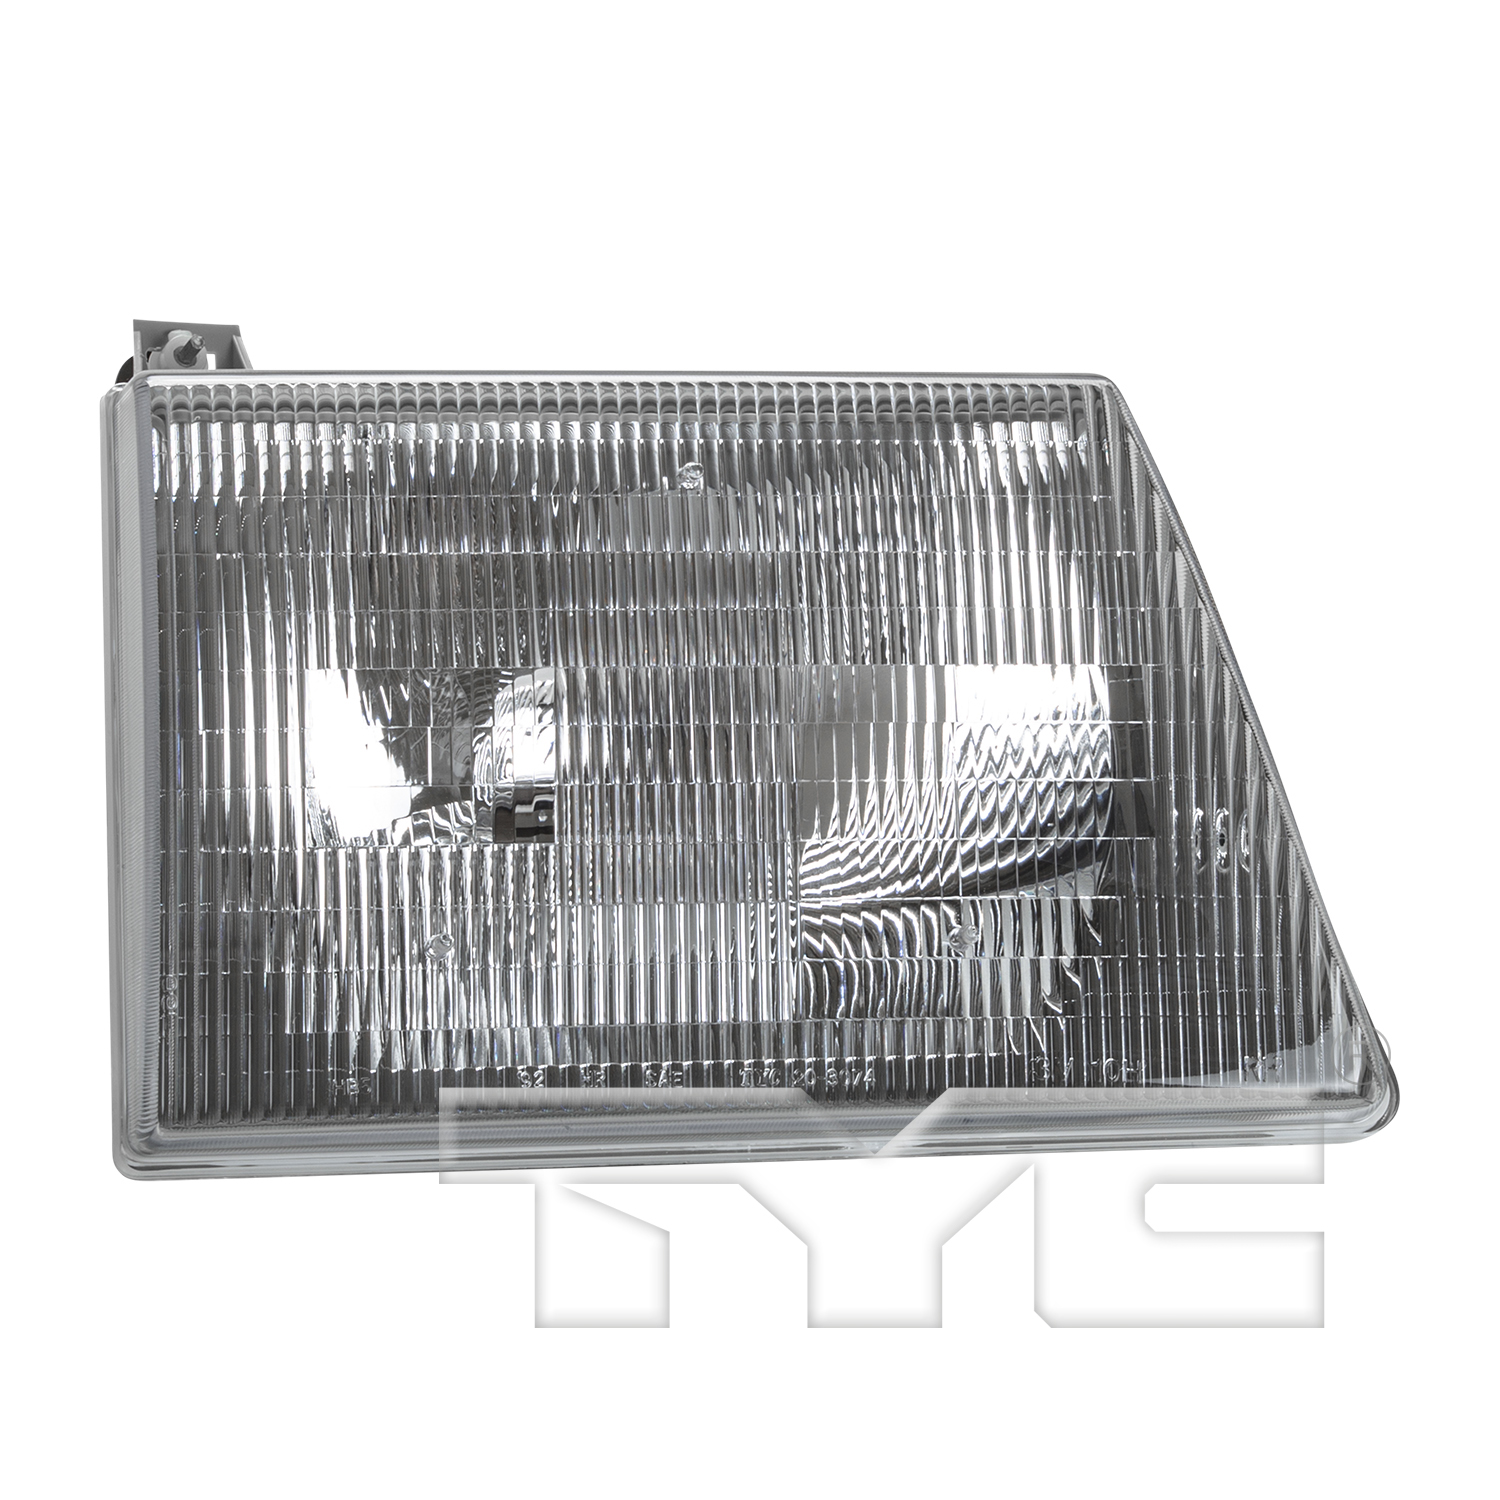 Aftermarket HEADLIGHTS for FORD - E-150, E-150,03-07,RT Headlamp assy composite